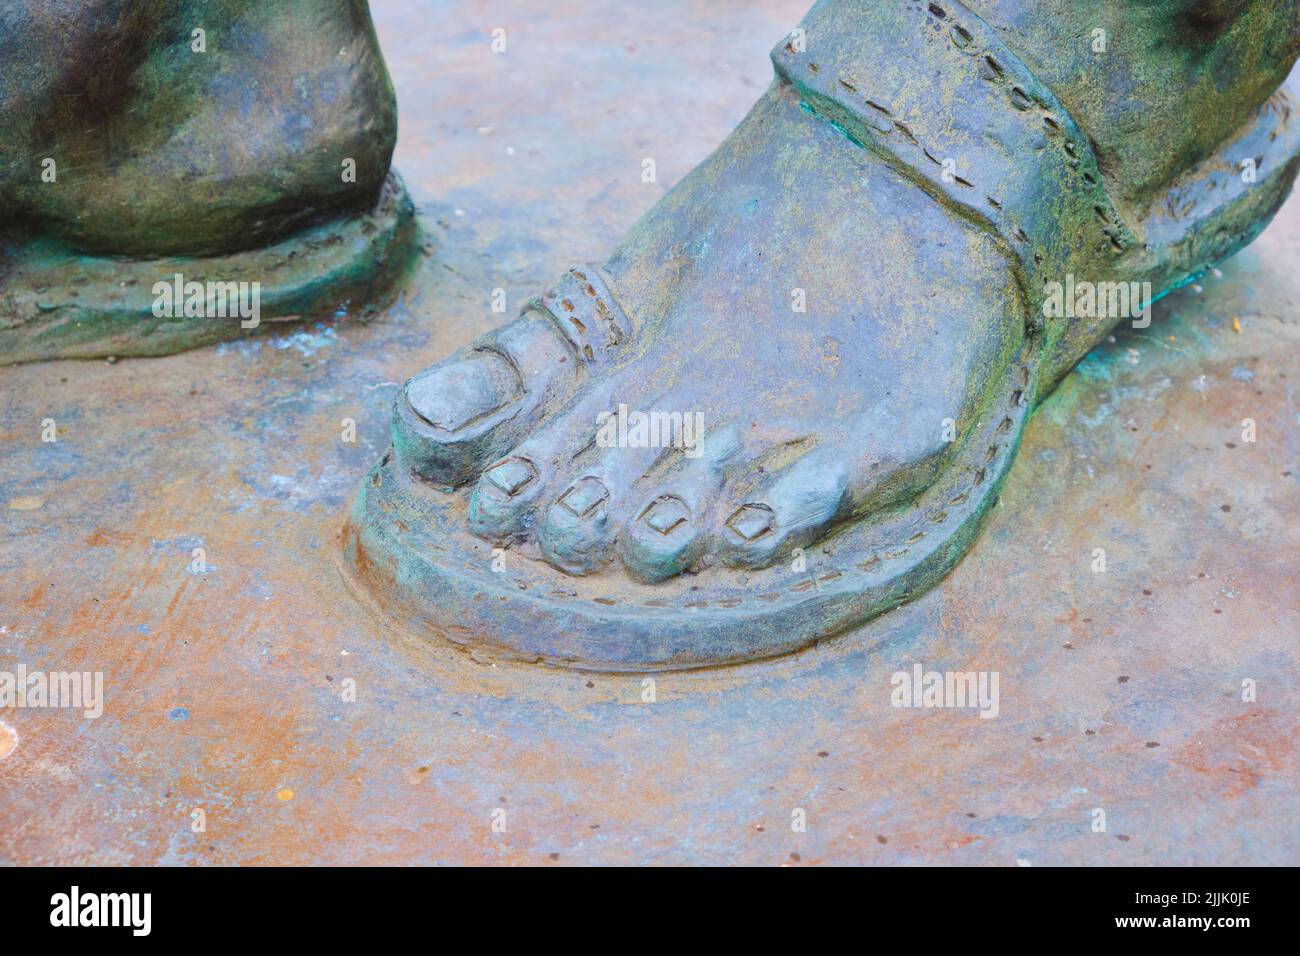 Close up, detail of a humble sandal shoe on the bronze statue of the Indian independence leader, Mahatma Gandhi. In Cardiff, Wales, United Kingdom. Stock Photo